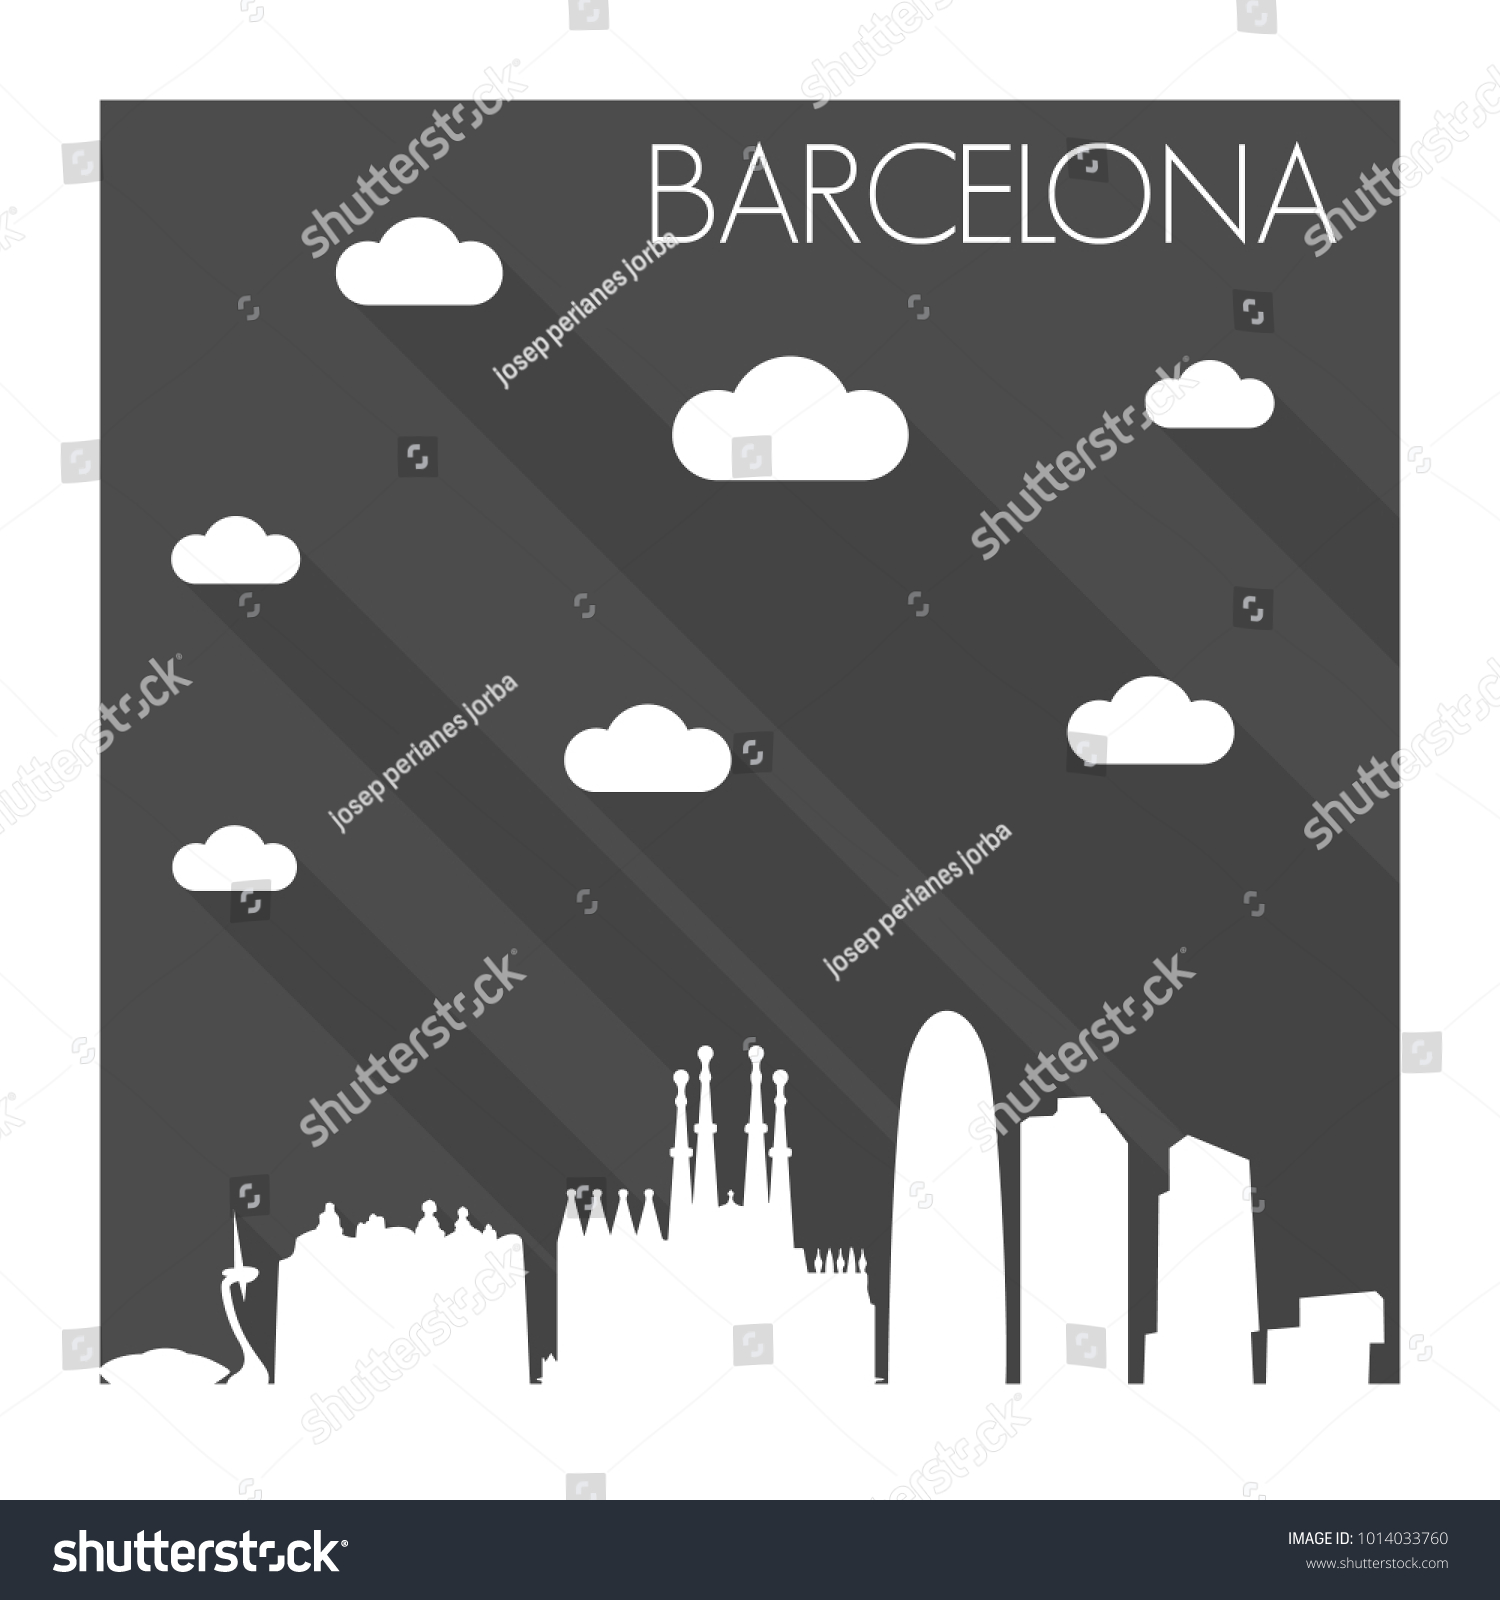 SVG of Barcelona Catalonia Spain Europe Flat Icon Skyline Silhouette Design City Vector Art Famous Buildings Monochrome Background Clouds Sky svg